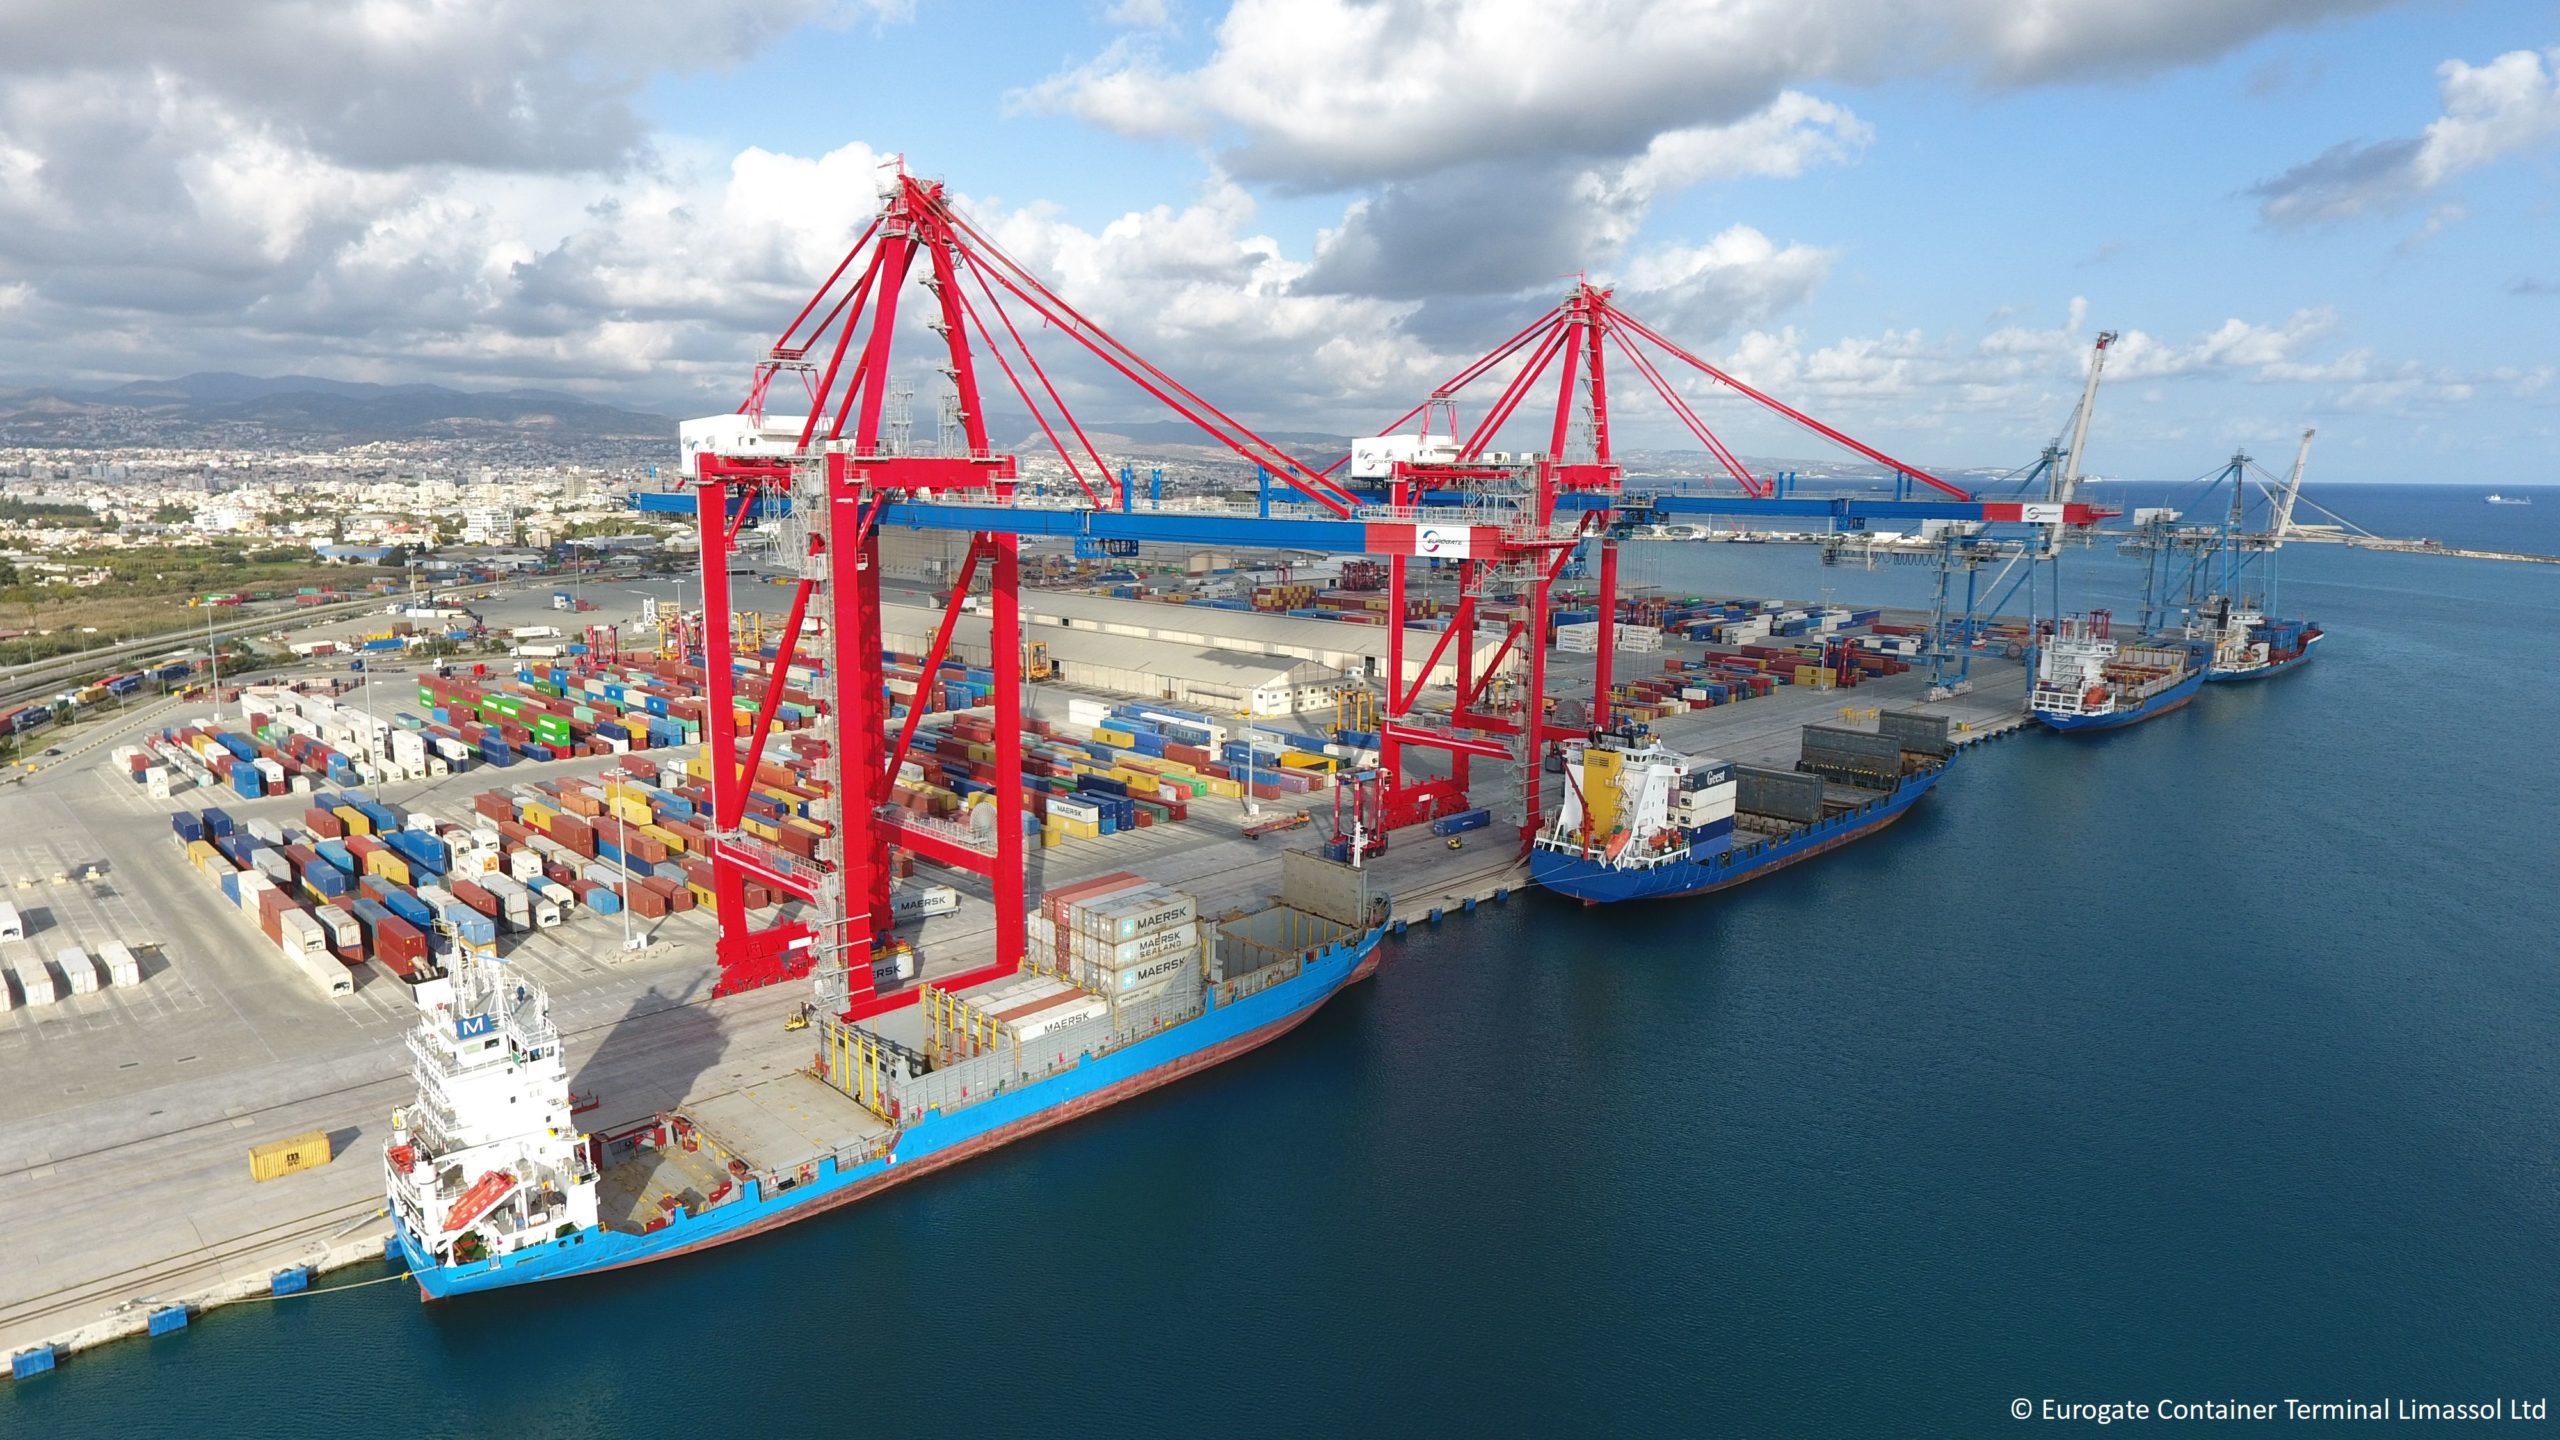 Eurogate marks four years managing Limassol container terminal